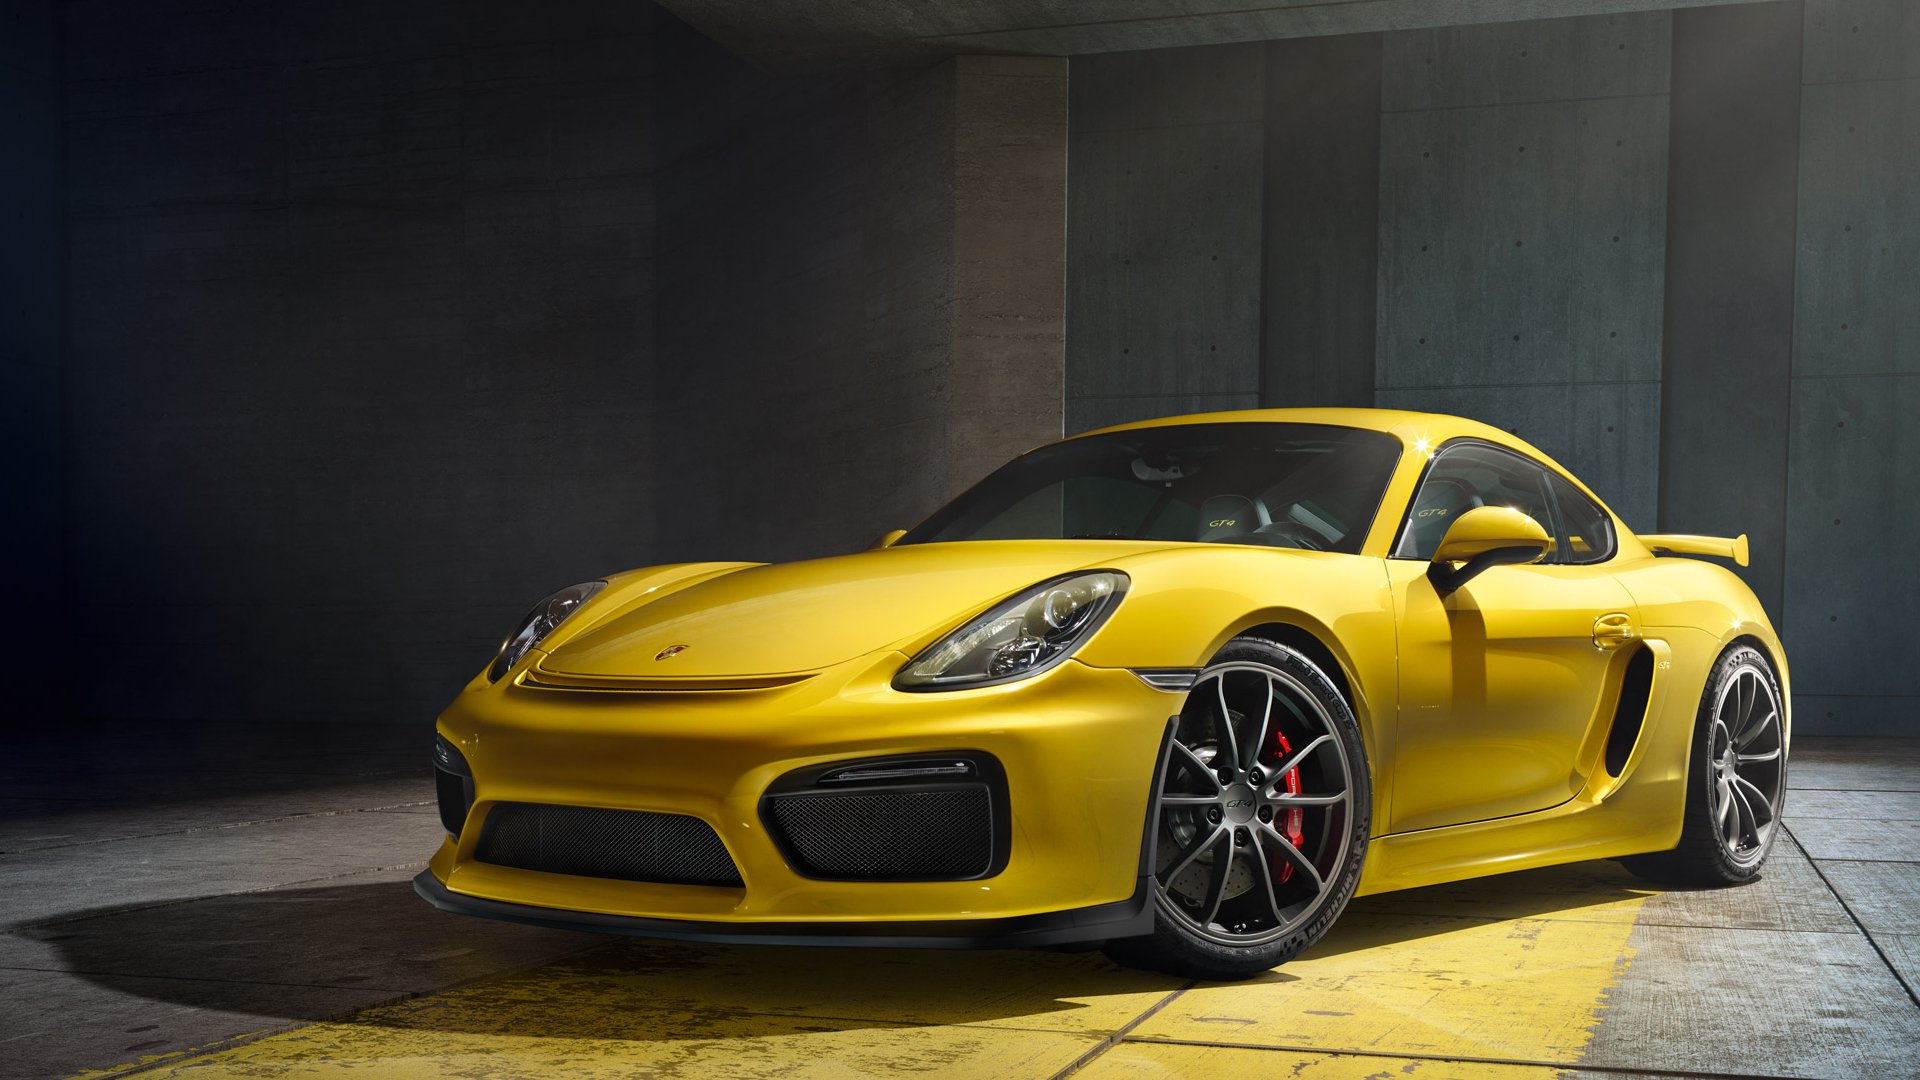 Porsche Cayman GT4 Ultimate Guide Review, Price, Specs